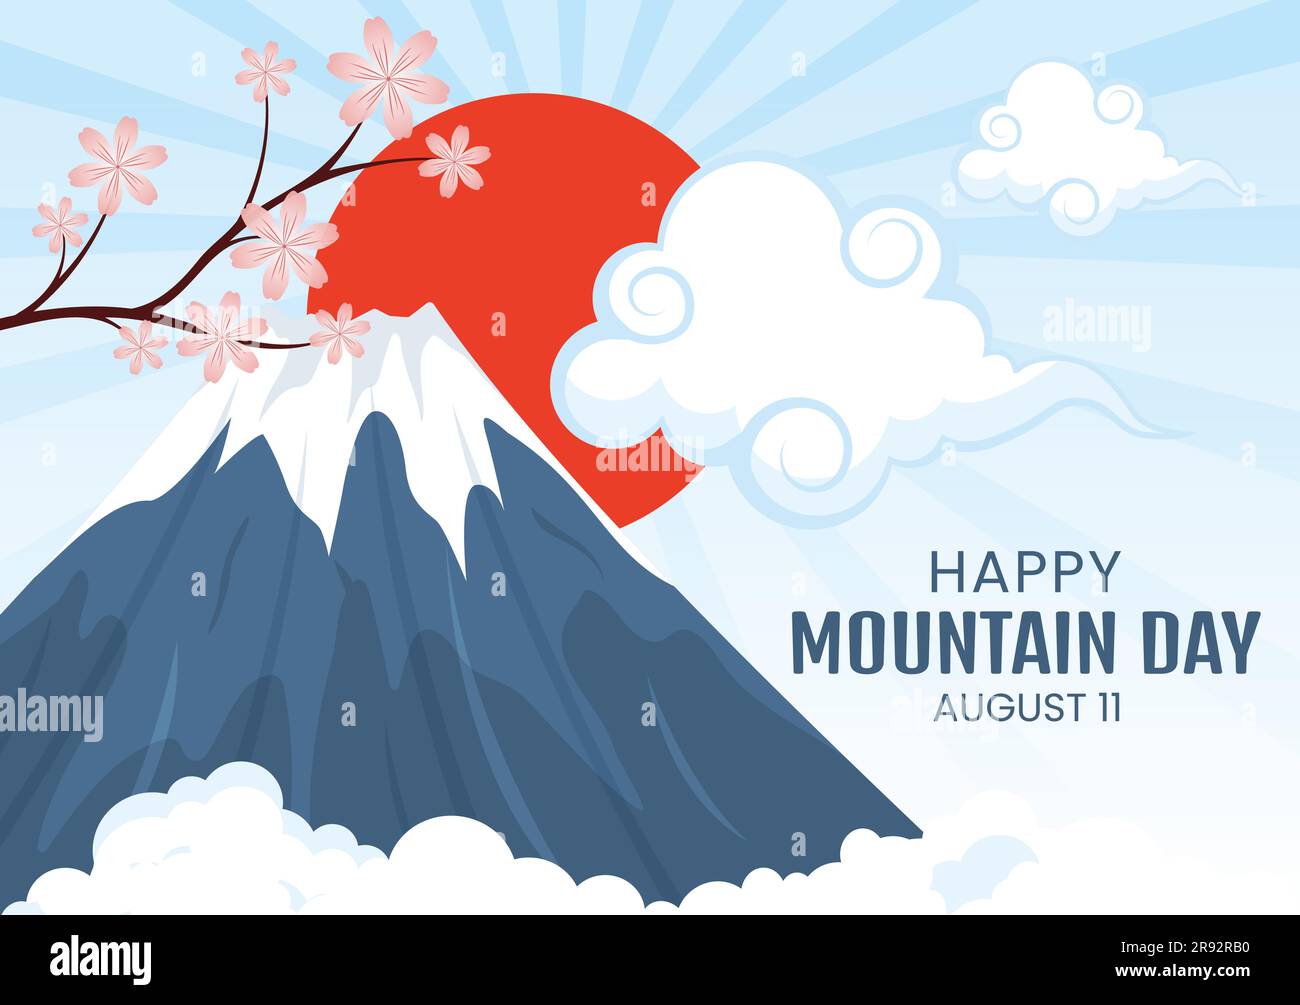 Mountain Day in Japan Vector Illustration on August 11 with Mount Fuji and Sakura Flower Background in Flat Cartoon Hand Drawn Templates Stock Vector